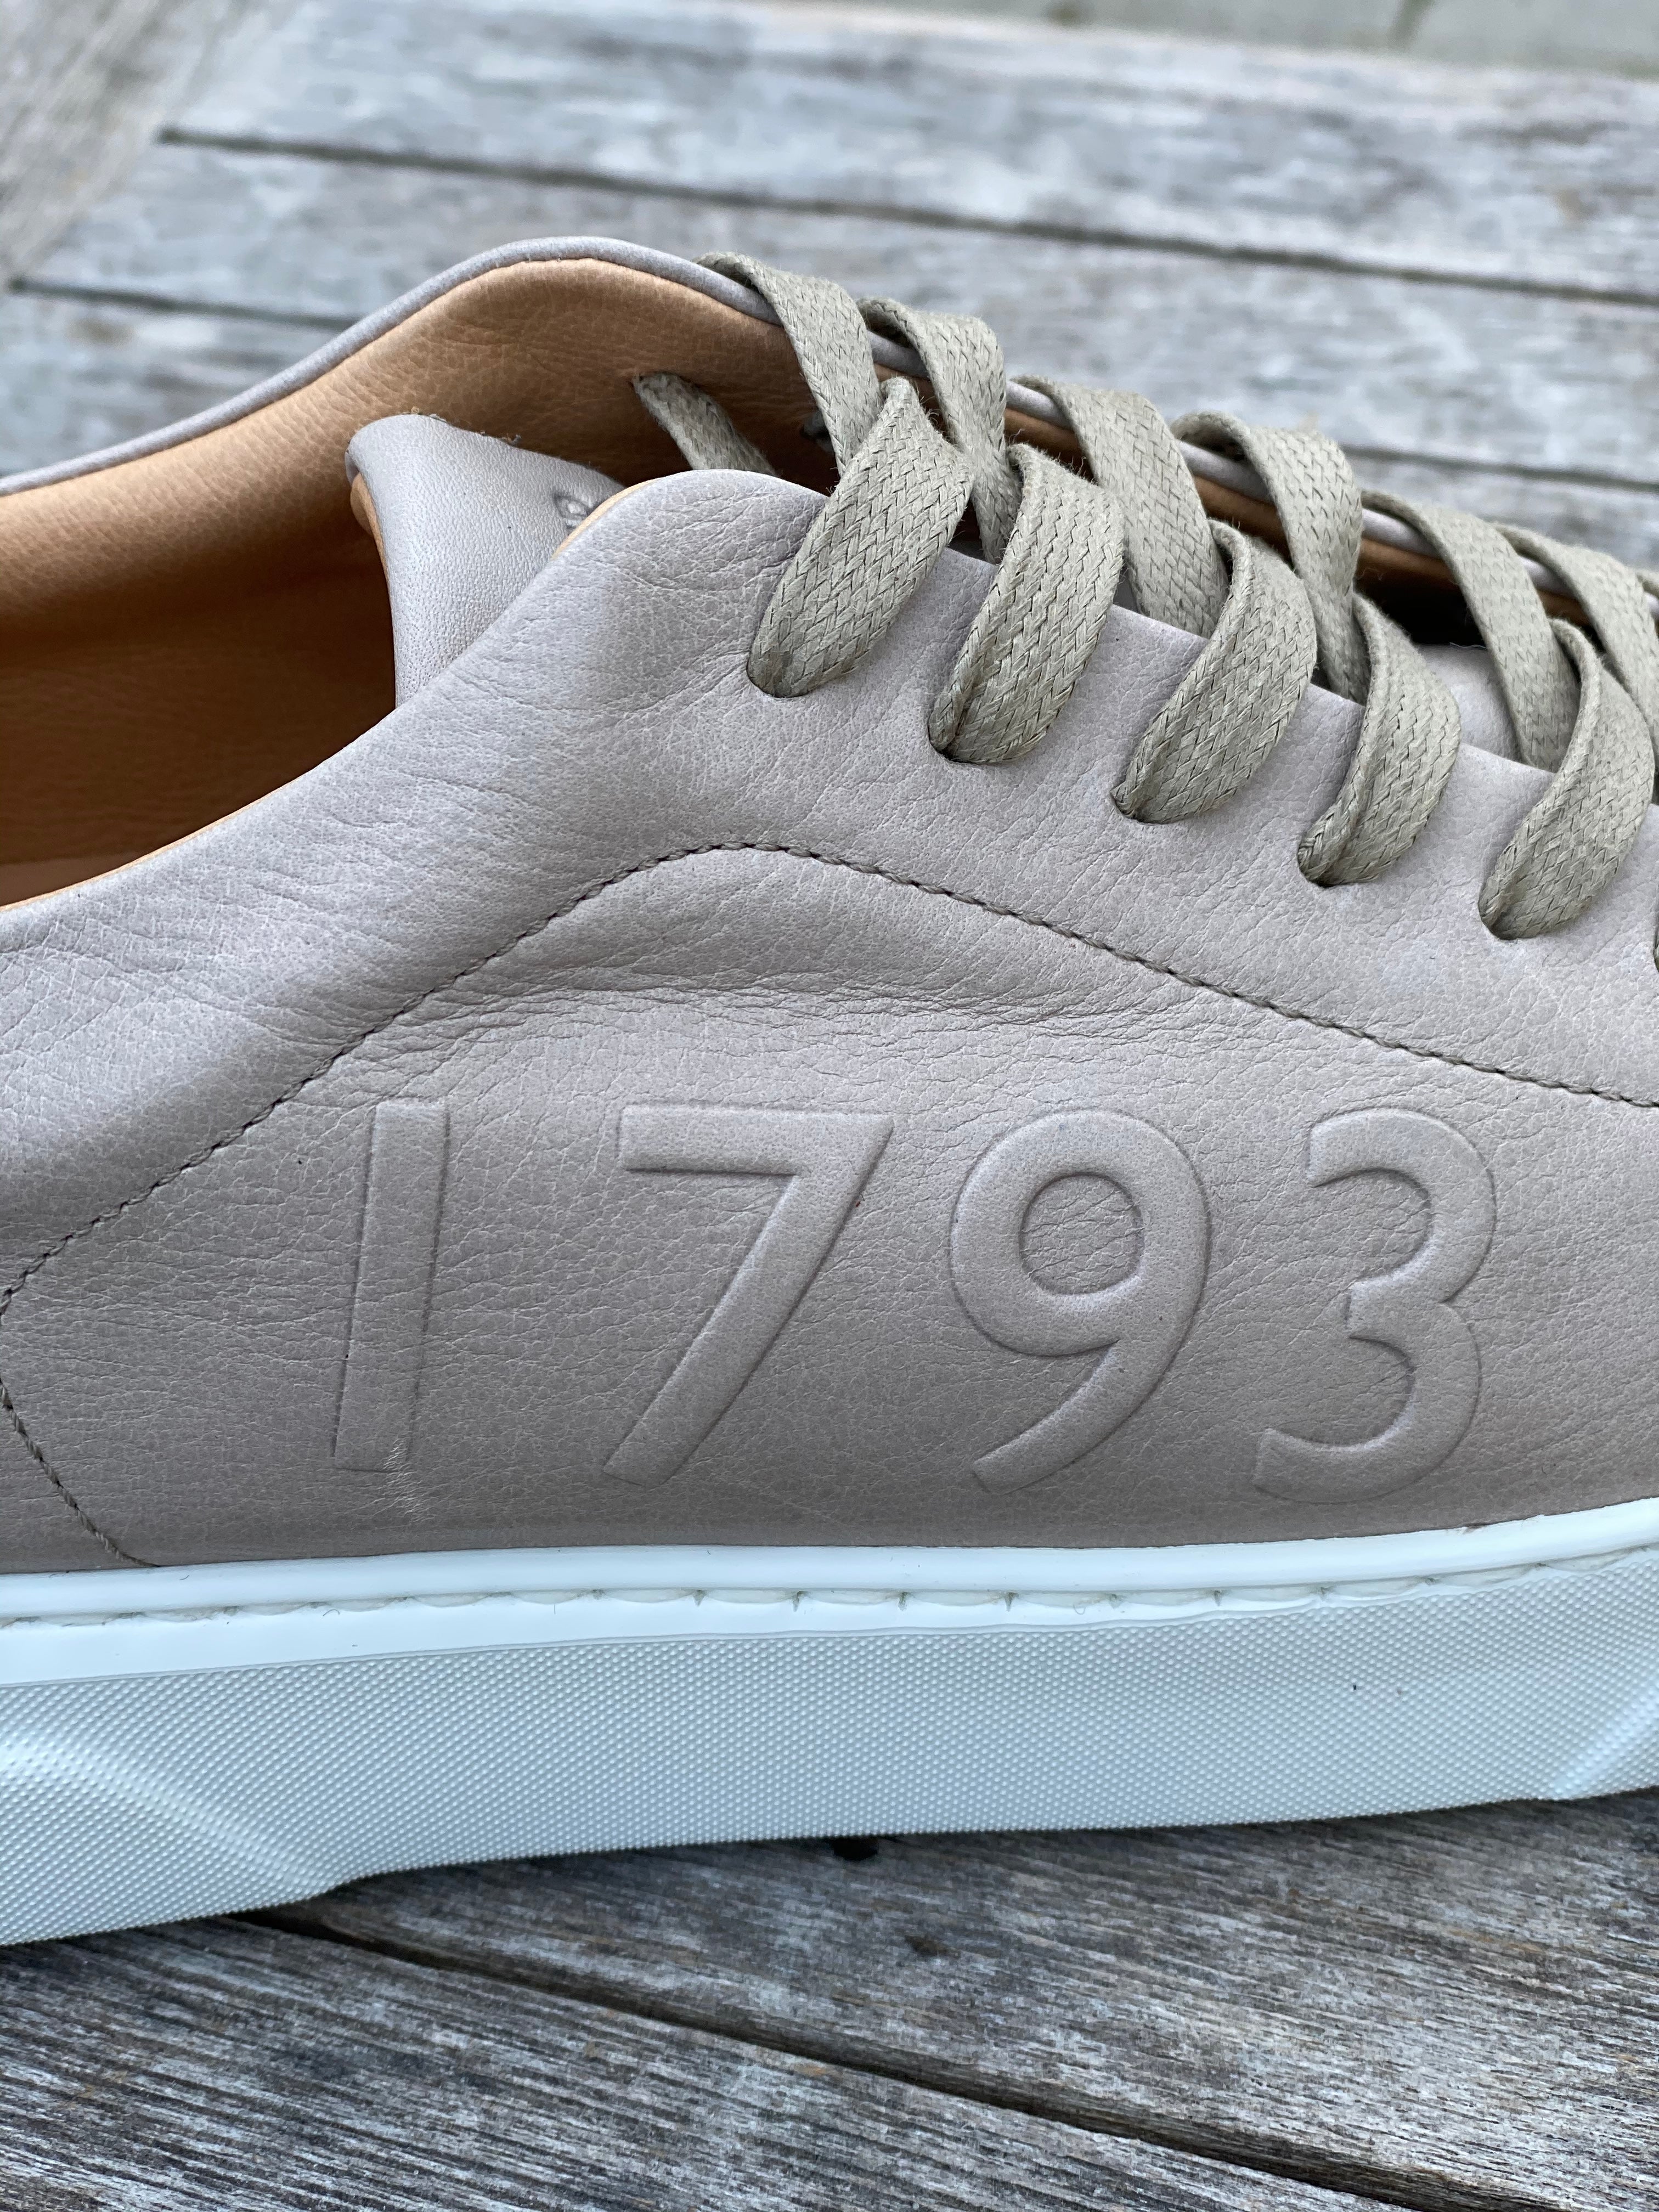 1793 Sneaker in Taupe